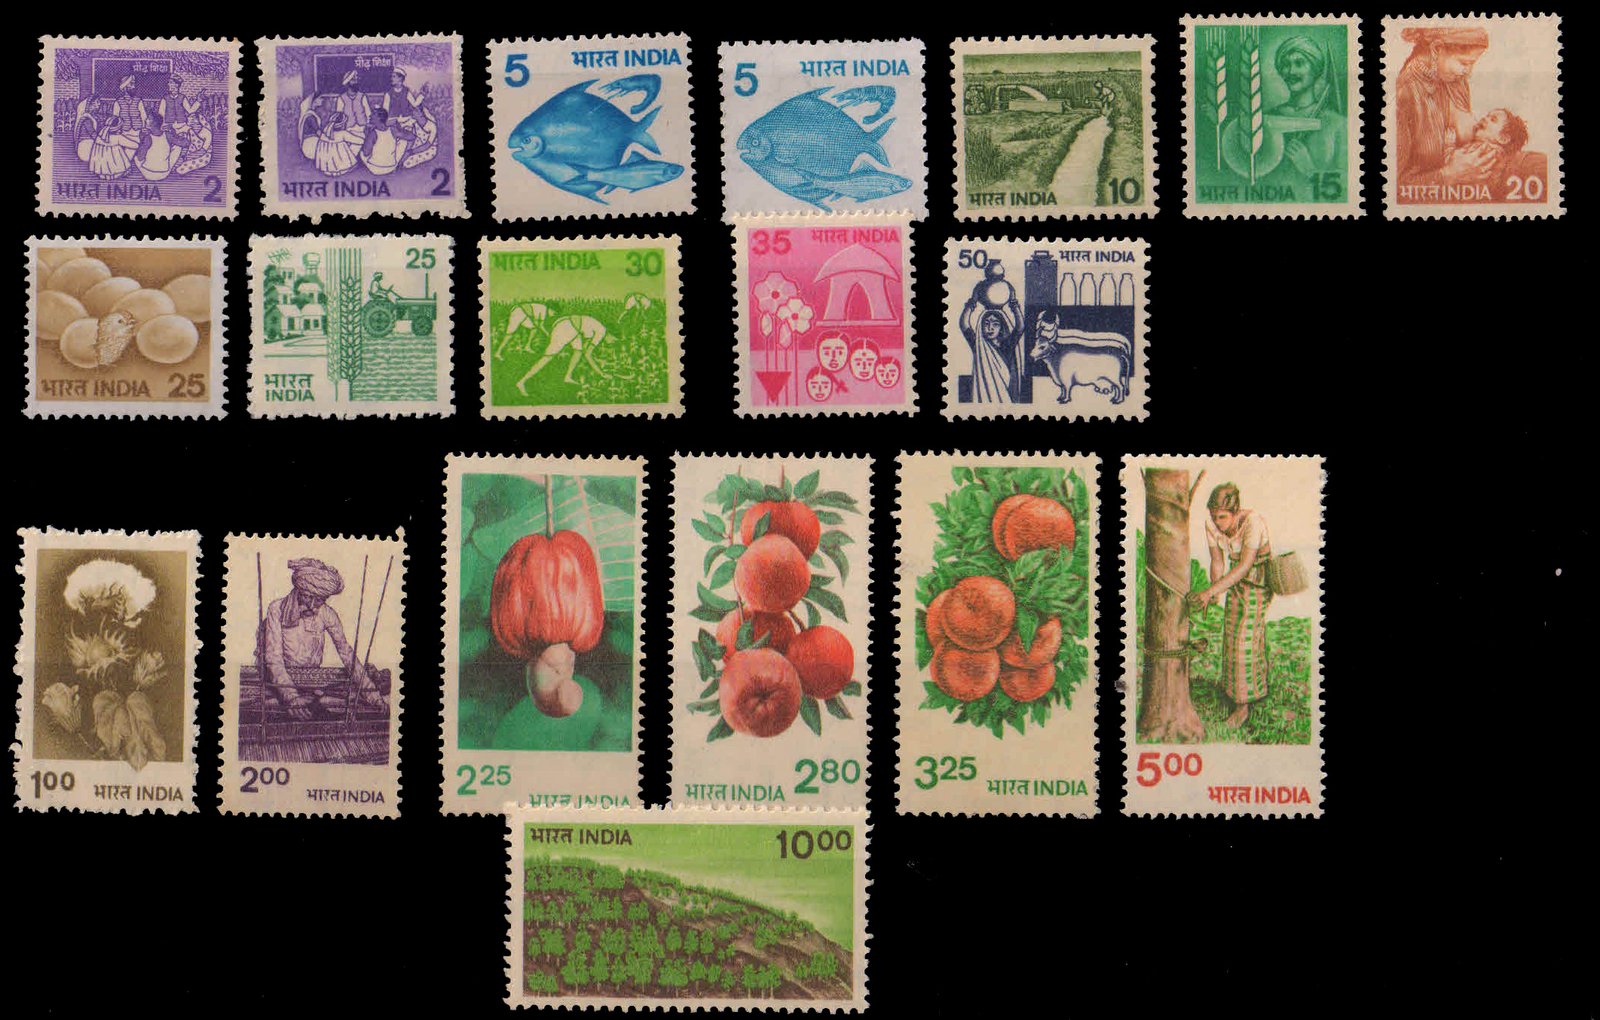 INDIA DEFINITIVE 6th Series, Rural Prosperity, Set of 19 Stamps as per scan